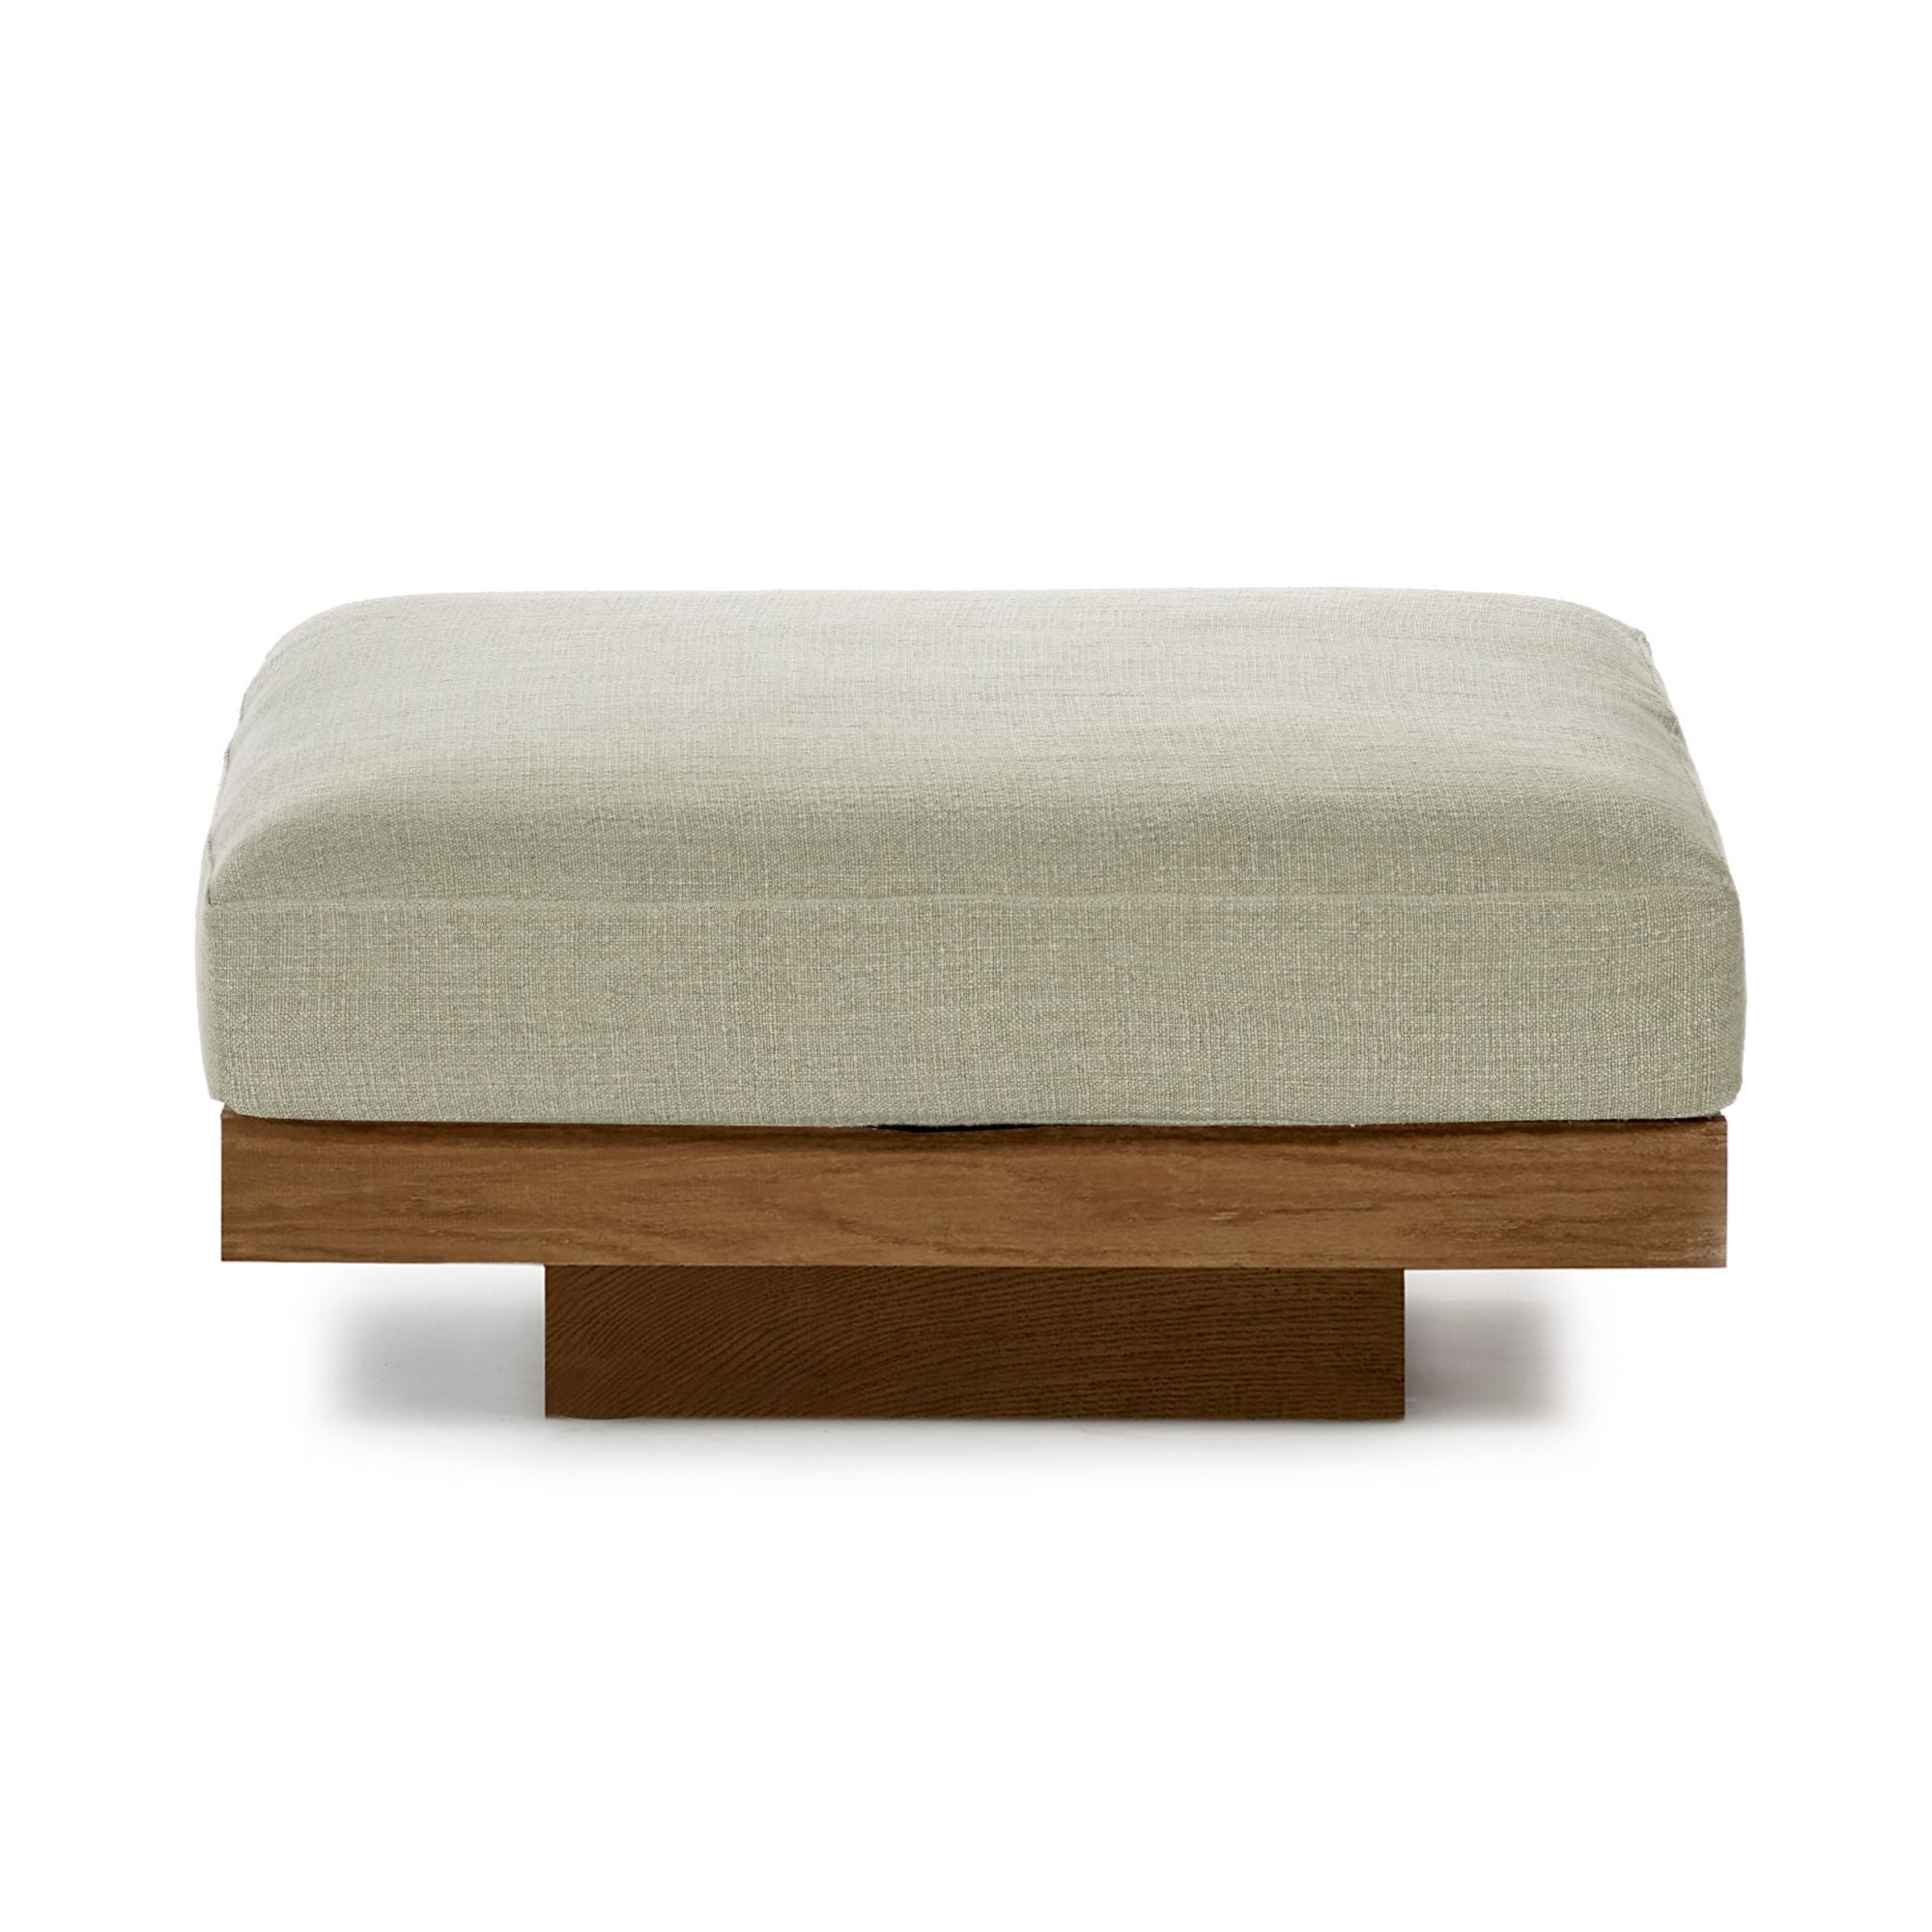 Rudolph Footstool - THAT COOL LIVING